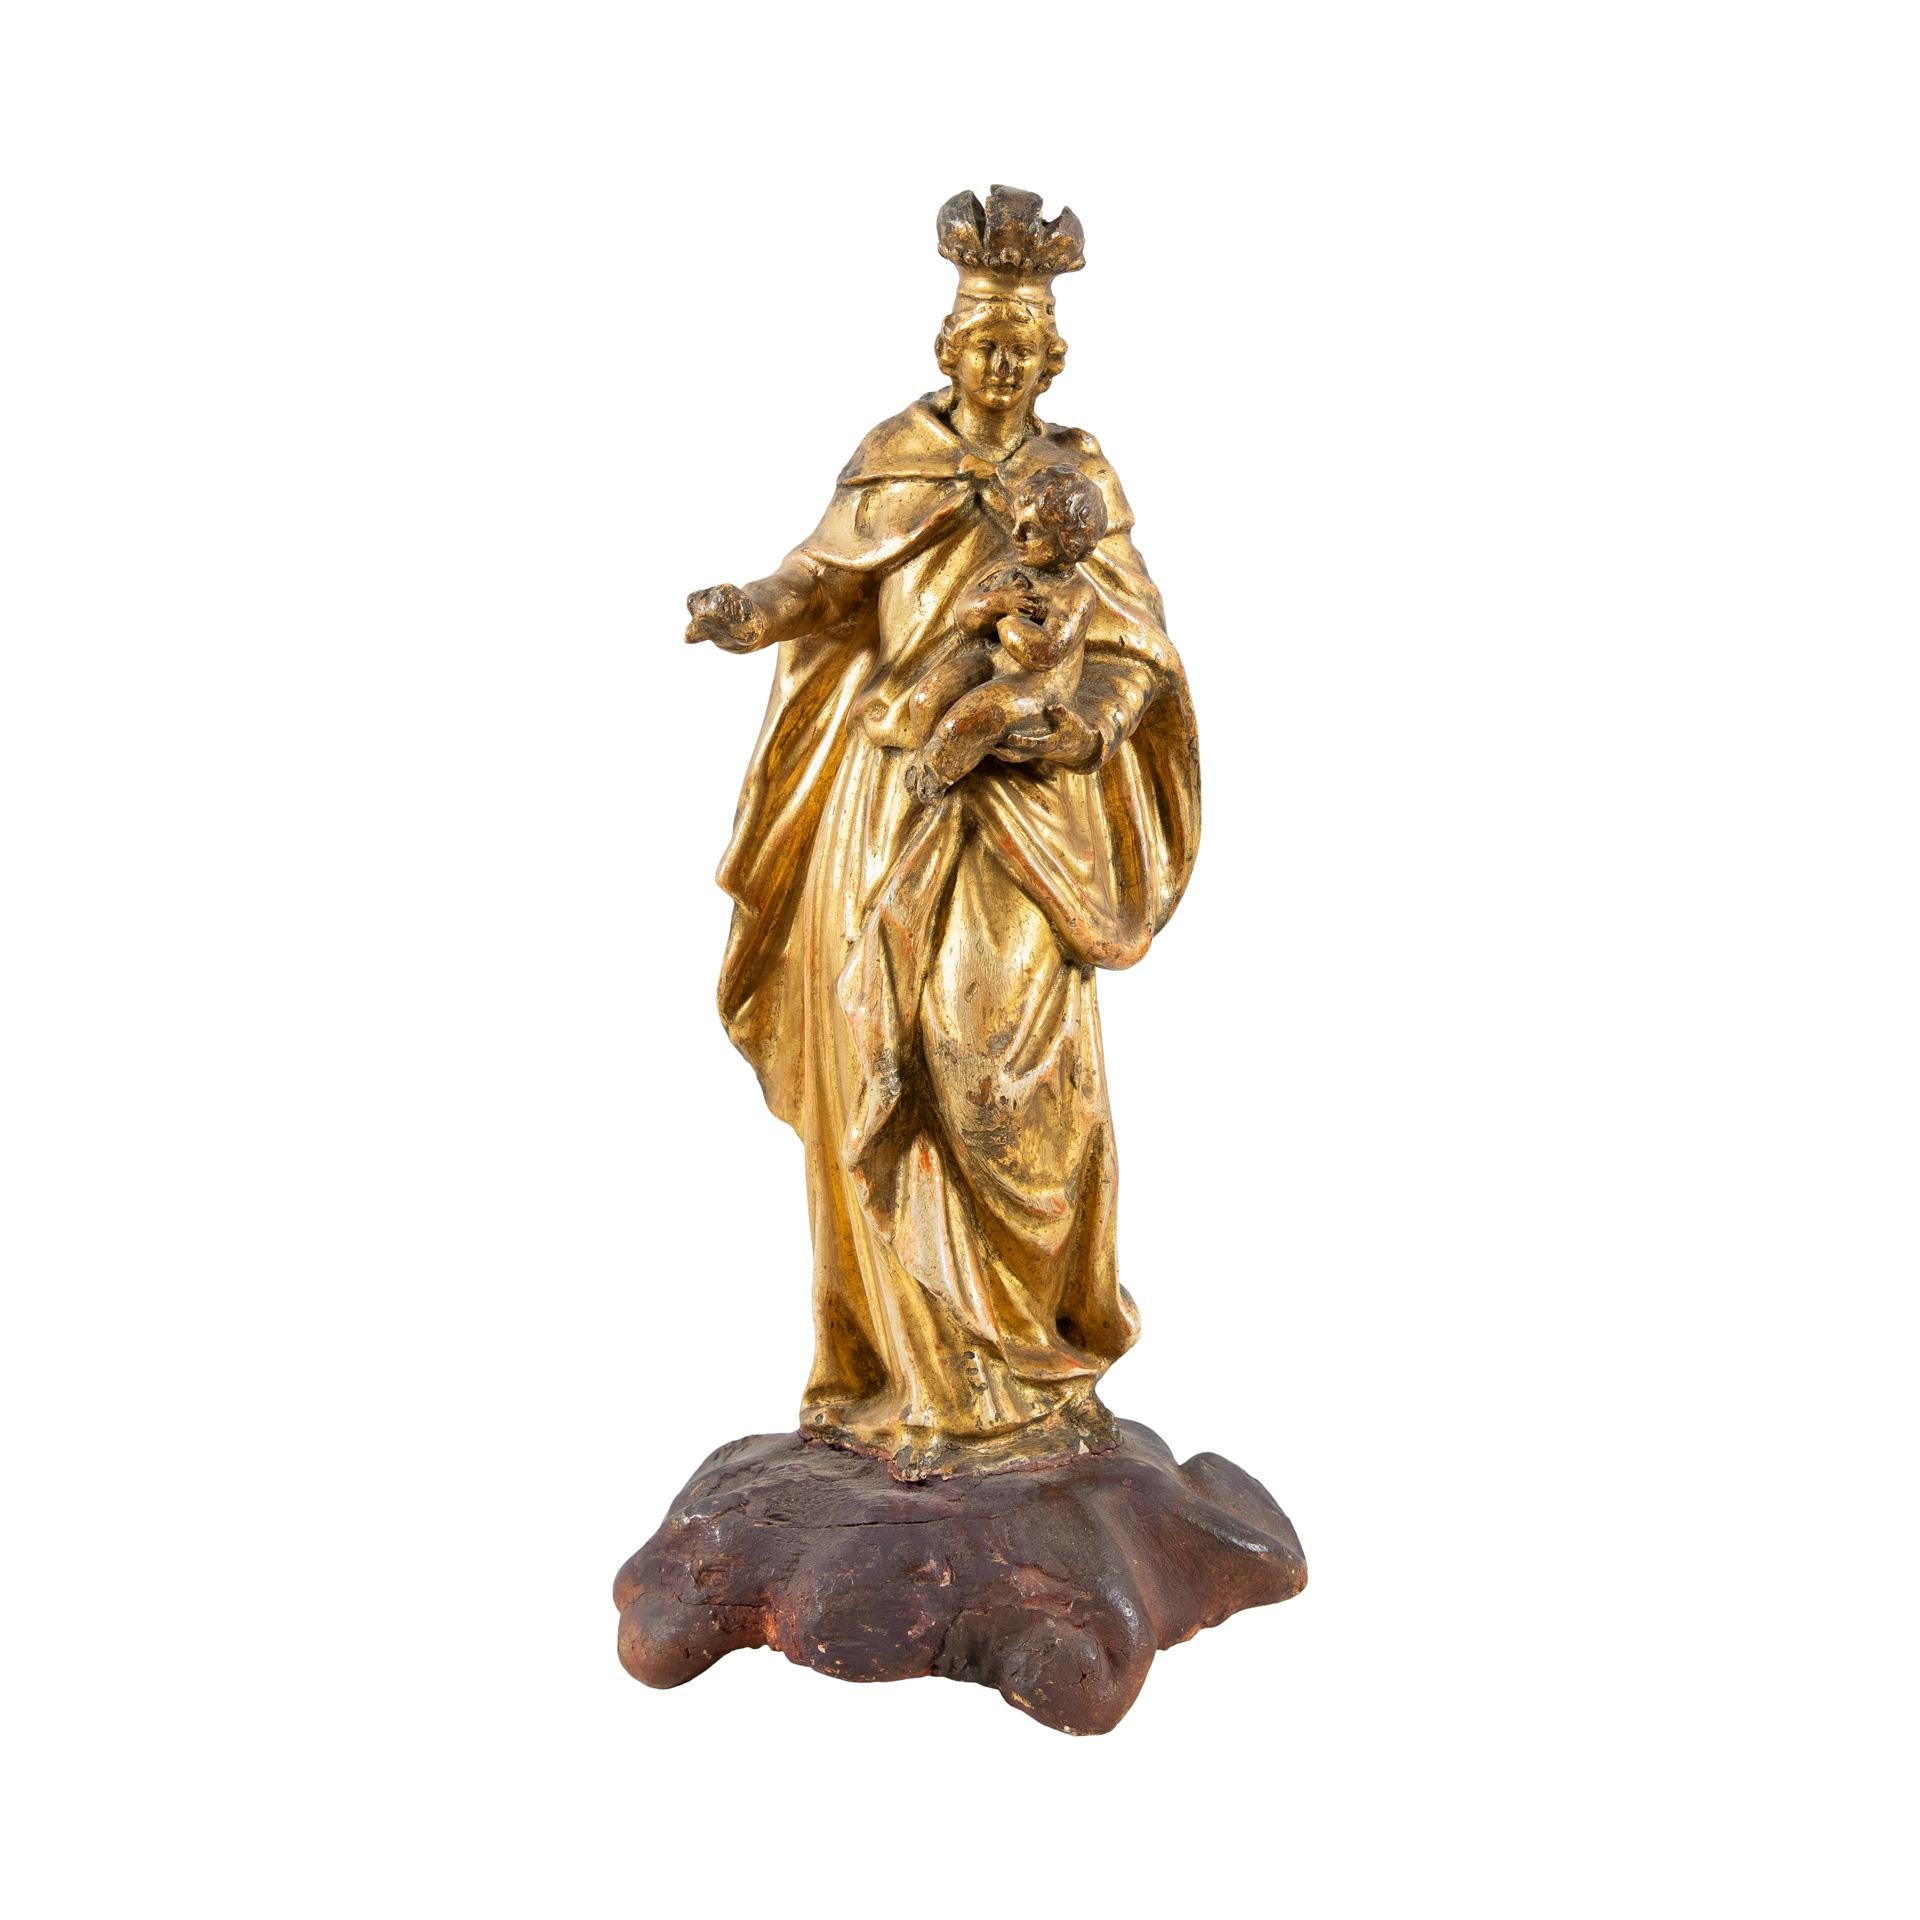 Unknown Figurative Sculpture - Italian Carved Gilded Wood Sculpture, Italy, 18th Century, Madonna Virgin